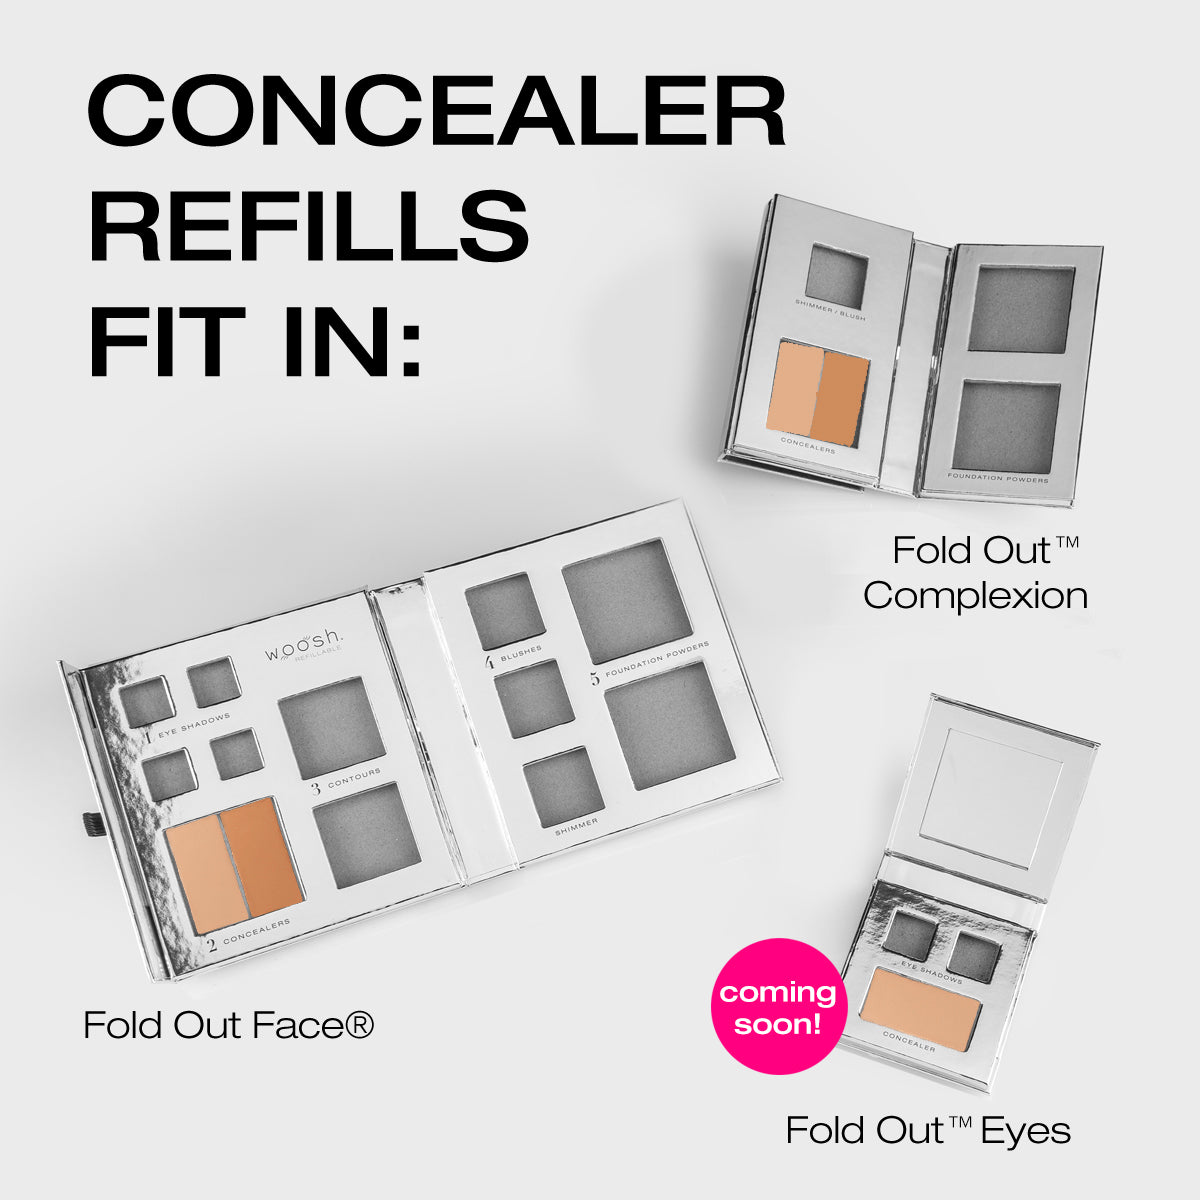 images of the fold out complexion, fold out face, and fold out eyes with the concealers placed inside the empty palette.